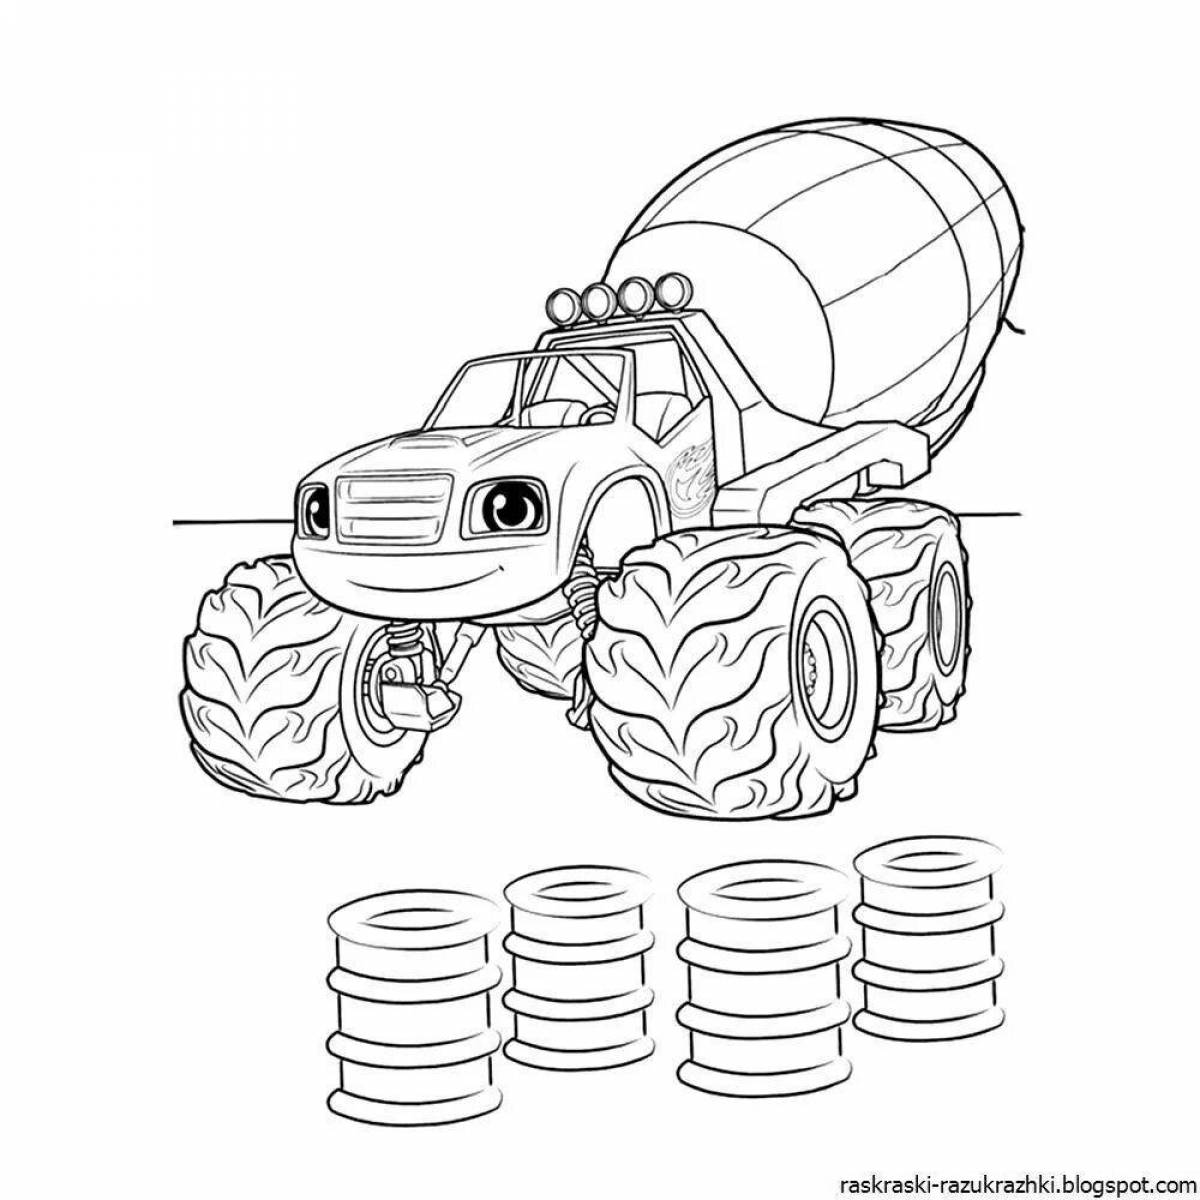 Color-explosion coloring page drive